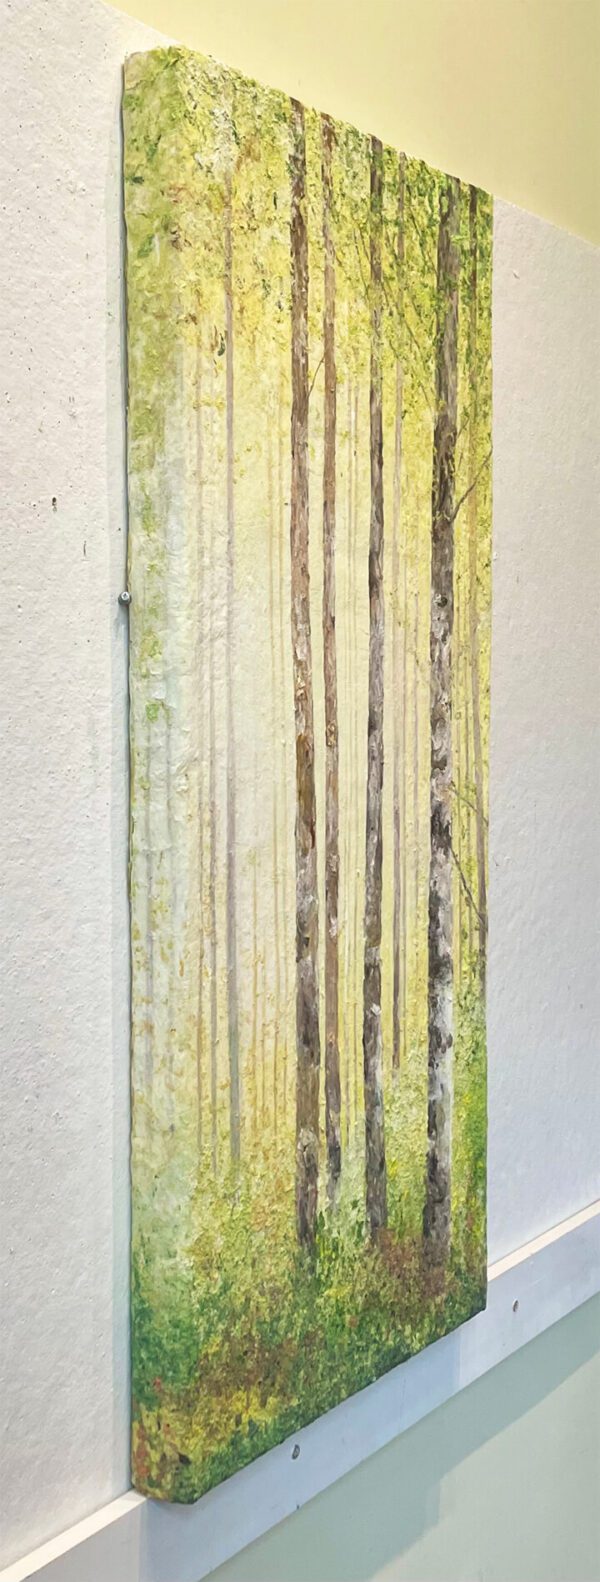 Early Spring Morning, Birch Trees 45 x 20 x 3 inches hanging on a wall.